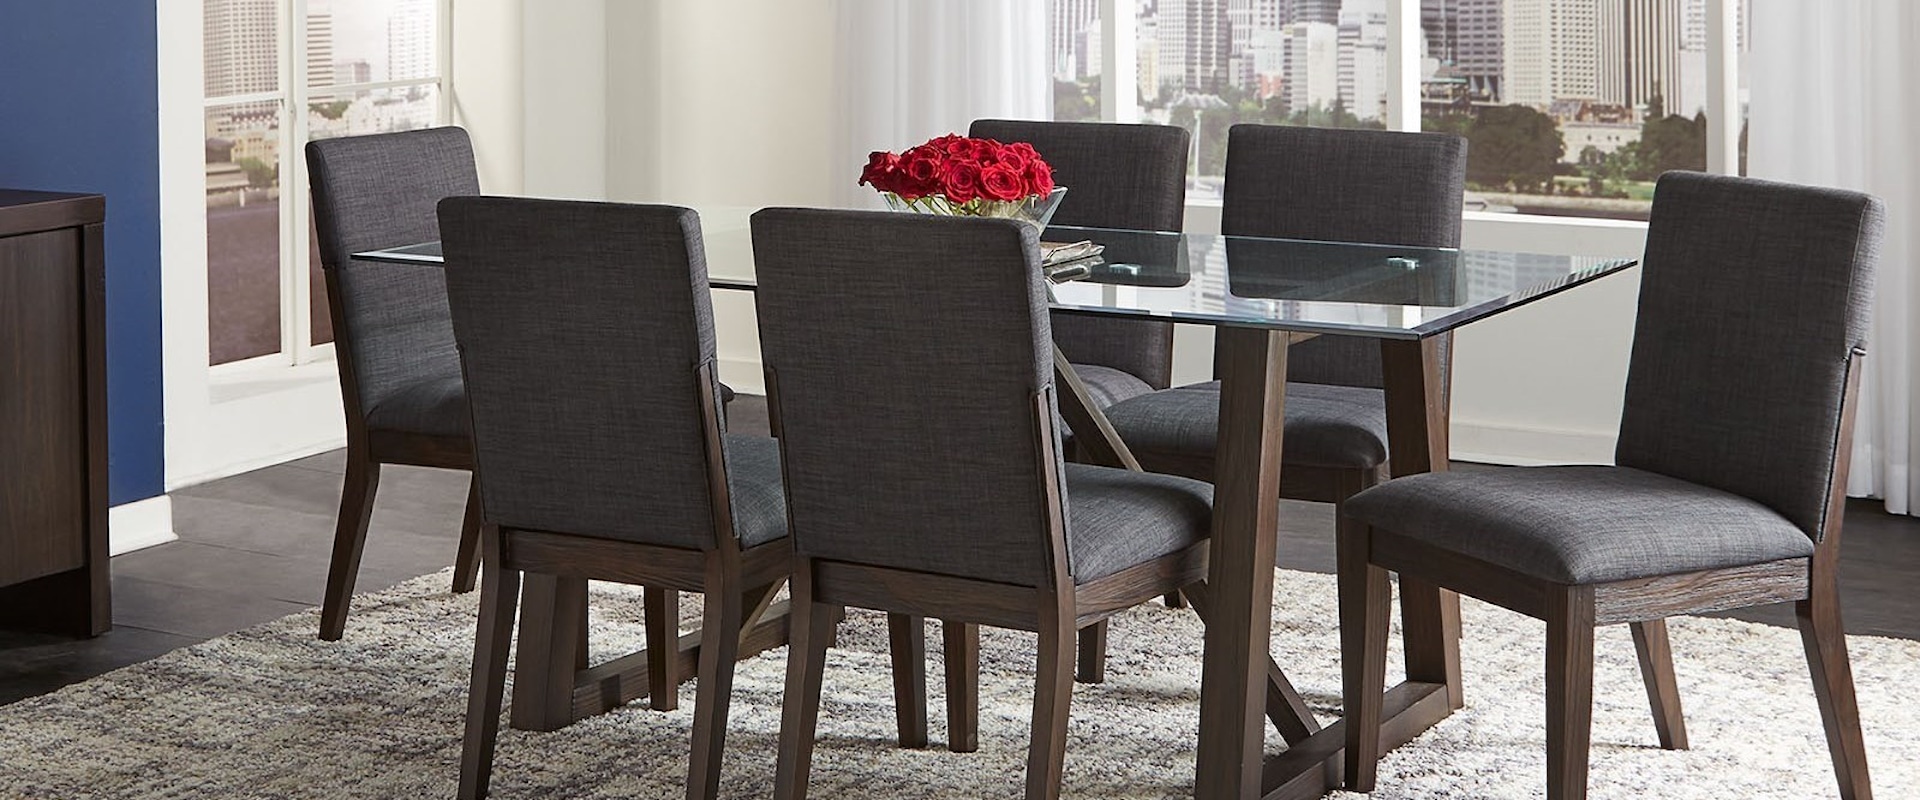 7-Piece Contemporary Dining Room Table Set with Glass Table Top